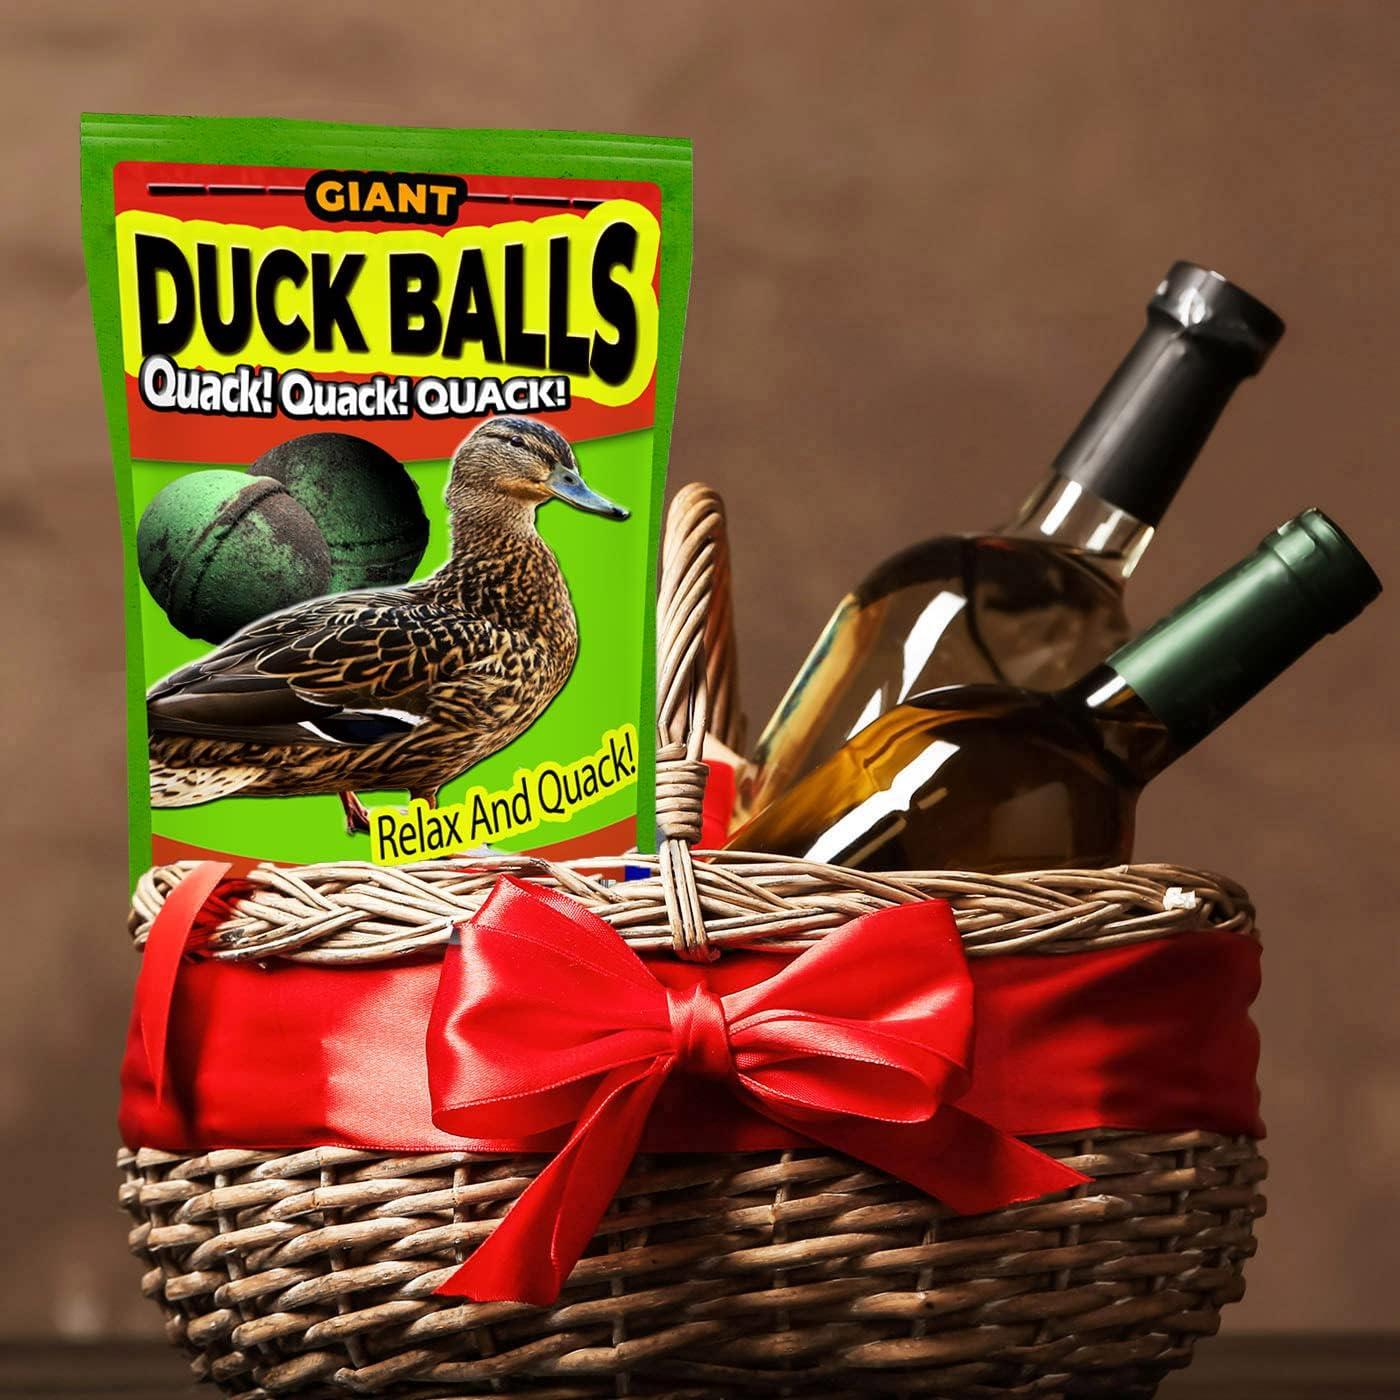 Giant Duck Balls Bath Time Adventure Kit - Funny Gift for Hunters - Duck  Hunting Gifts for Men - Stocking Stuffer Hilarious Gag Gift Adult Gift  Baskets Dirty Santa Bath Bomb Bath Time